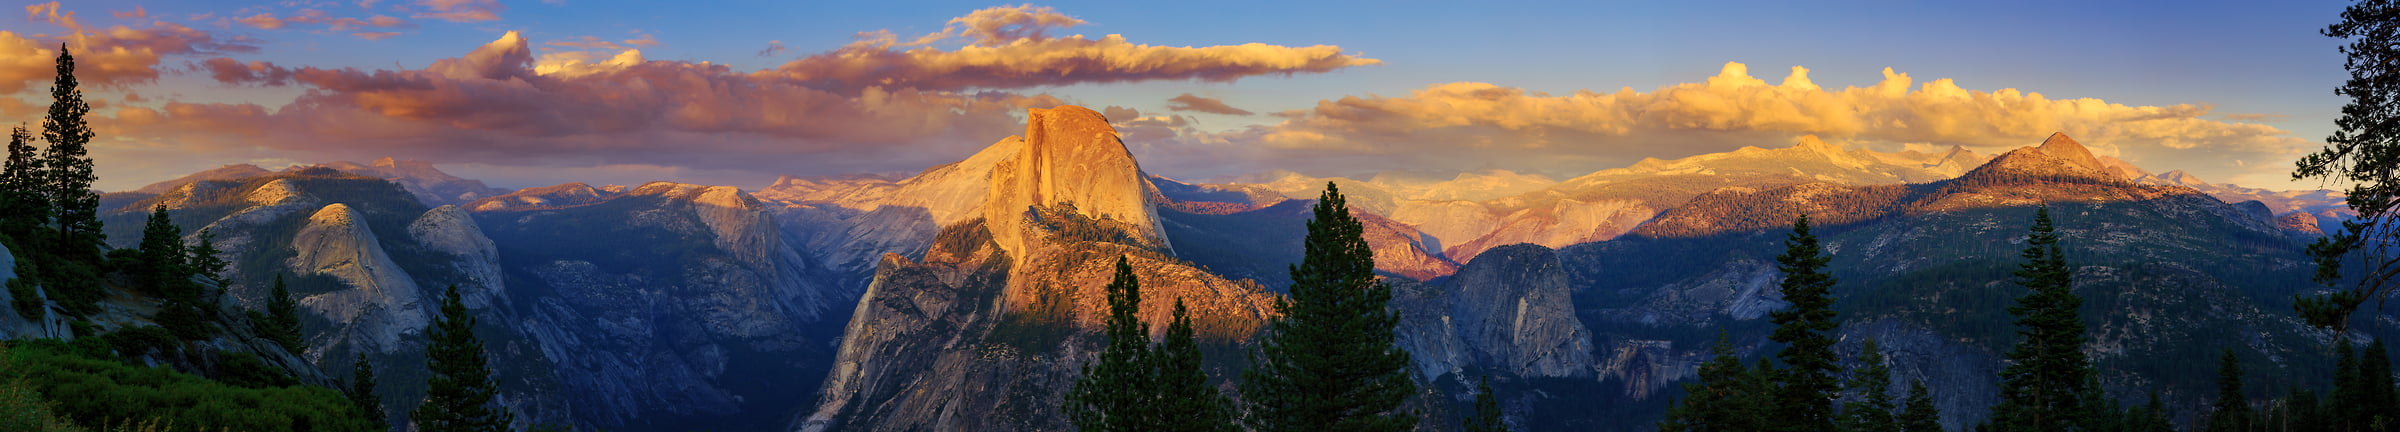 183 megapixels! A very high resolution, large-format VAST photo print of the Yosemite Naitonal Park valley and Half Dome at sunset from Glacier Point; nature landscape photo created by Guido Brandt